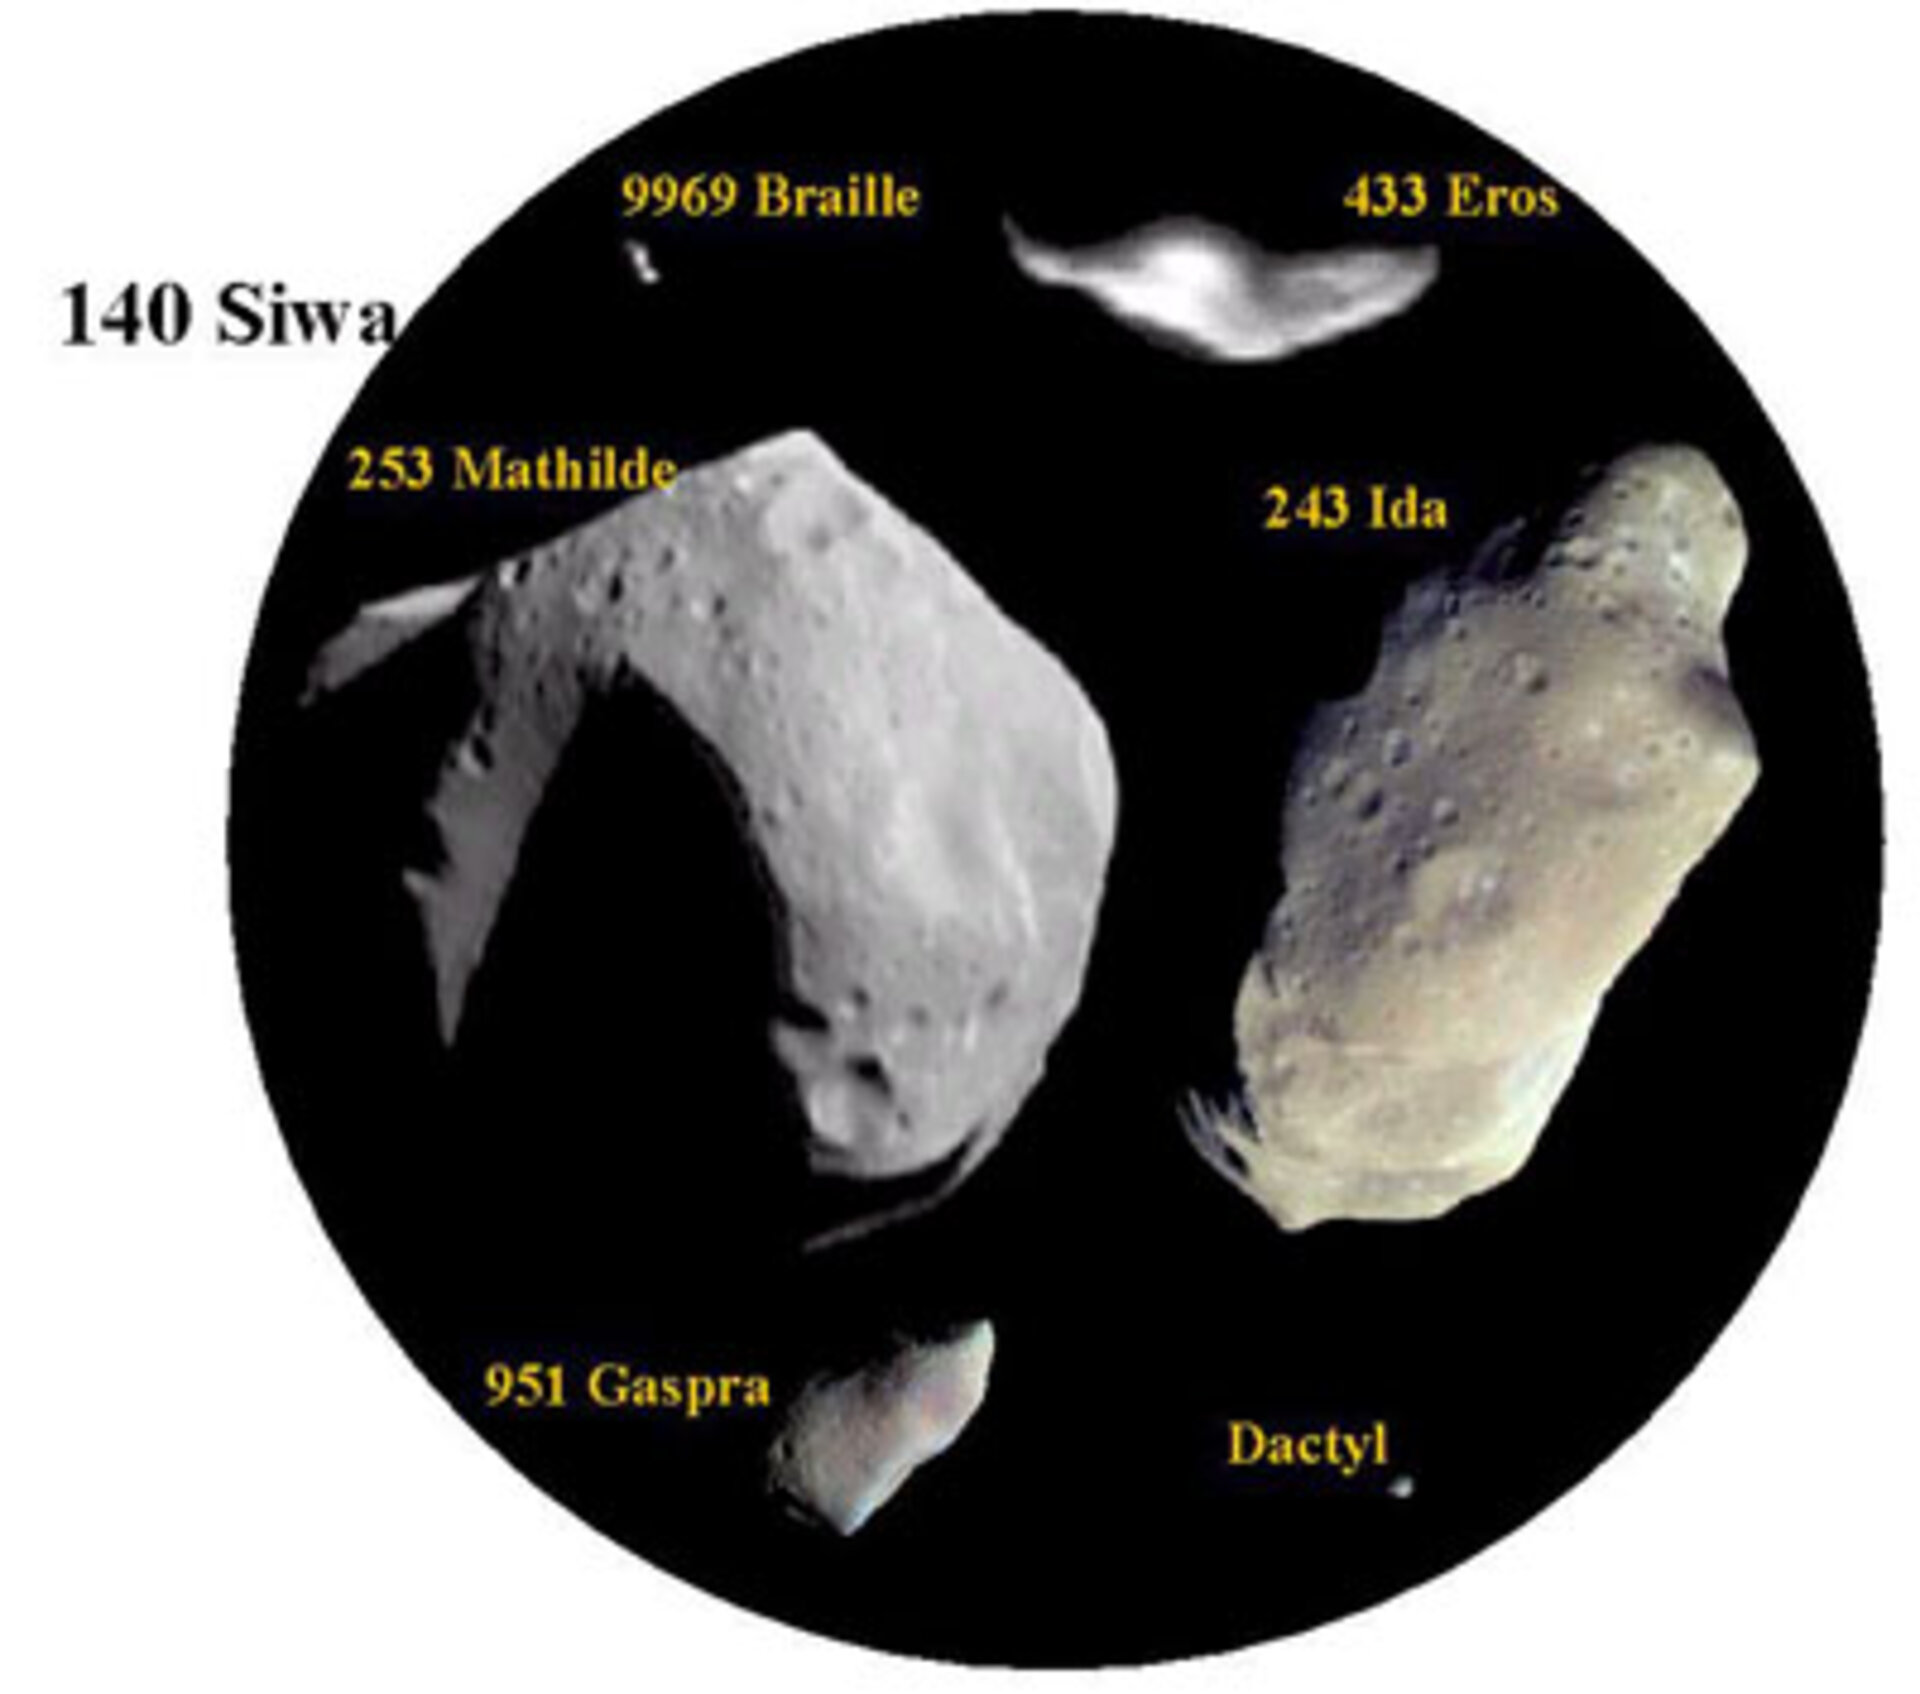 Comparative sizes of asteroids